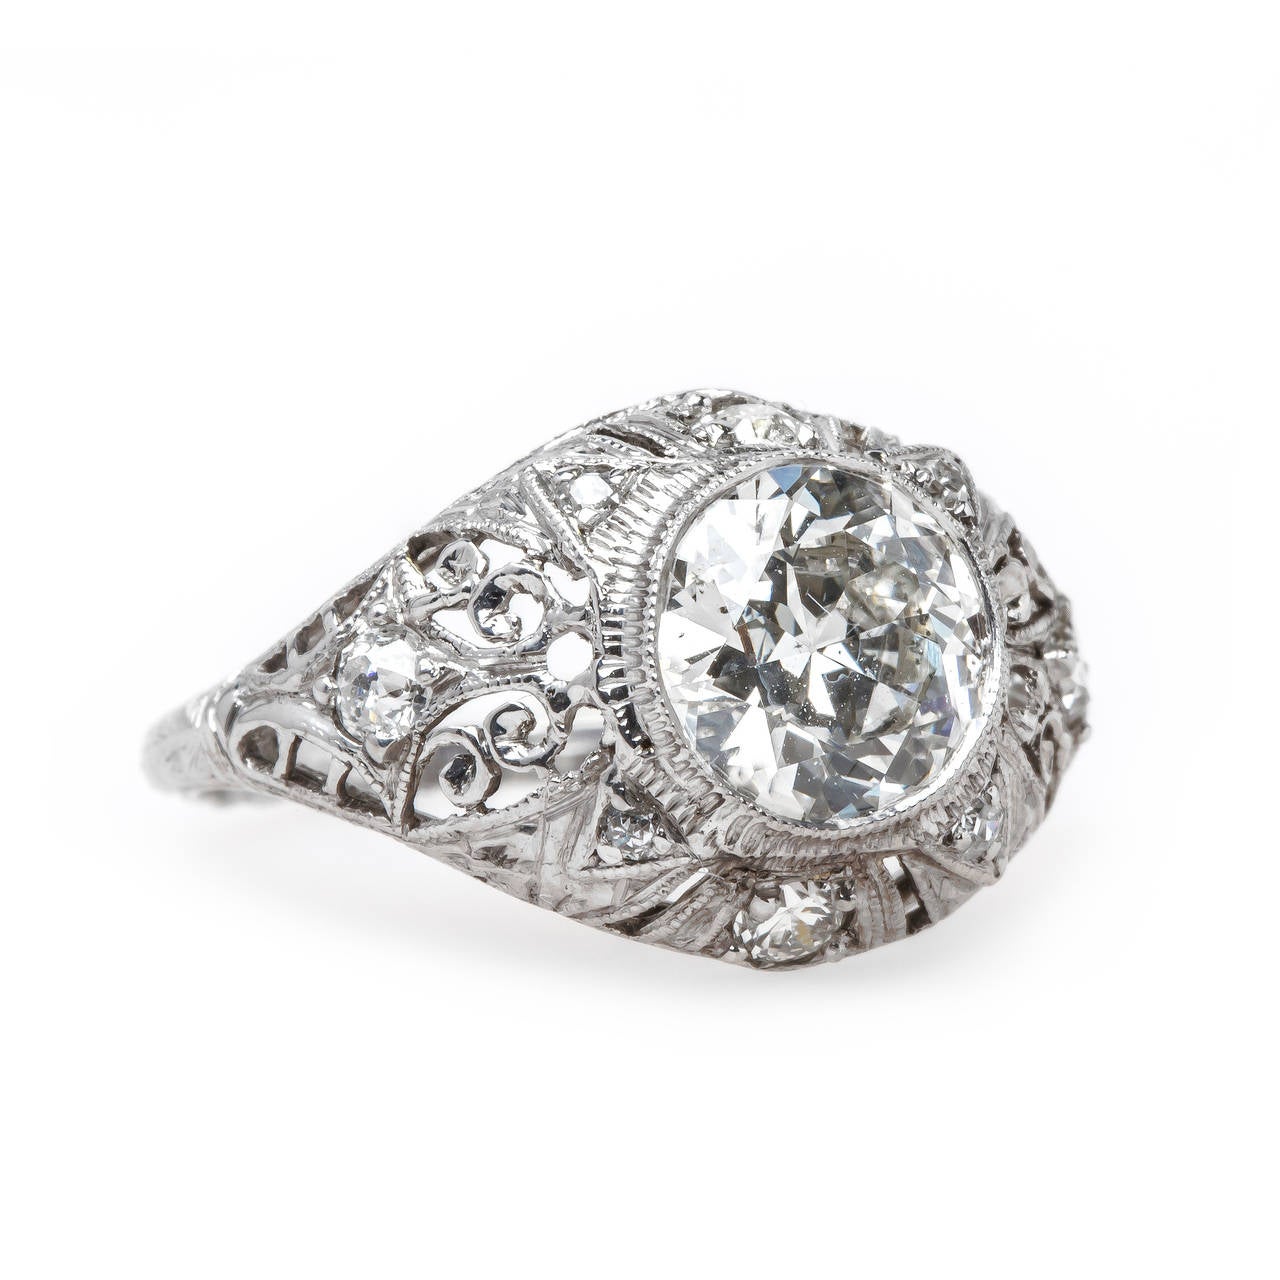 Abernathy is a spectacular Edwardian era (circa 1915) platinum ring centering a bezel set 1.43ct EGL certified Transitional Round Brilliant Cut diamond graded G color and VS2 clarity. The bombe style ring is further adorned with four Old European